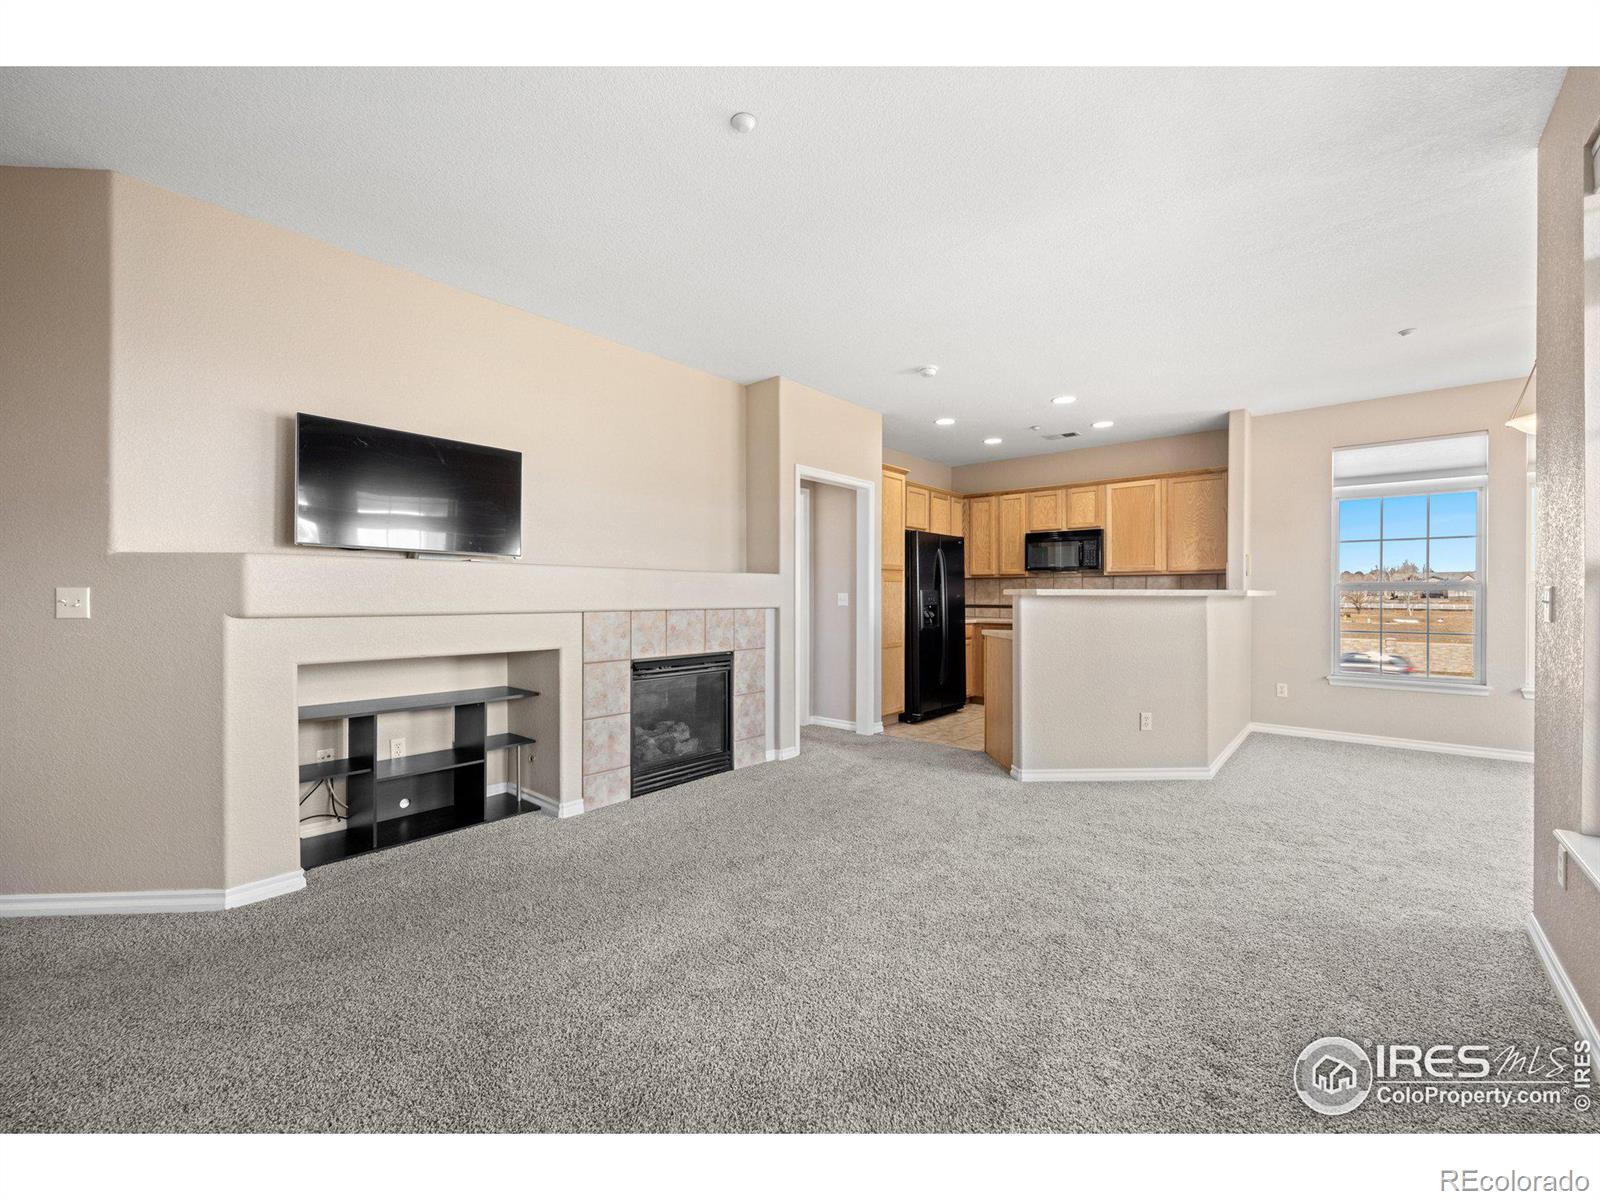 3307  molly lane, Broomfield sold home. Closed on 2024-05-24 for $389,250.